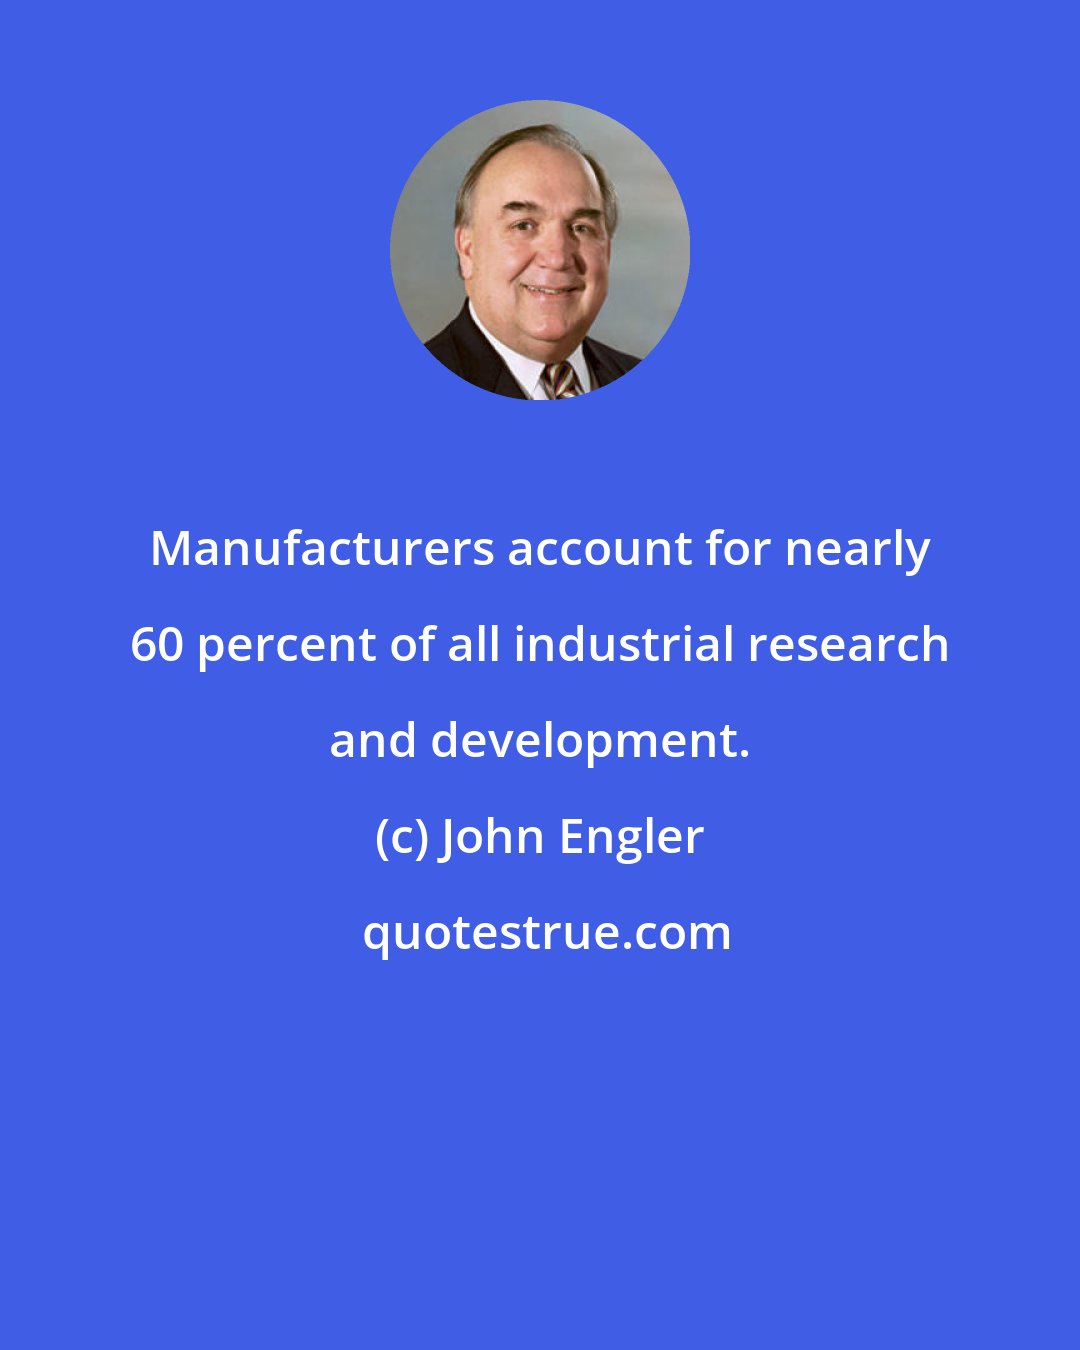 John Engler: Manufacturers account for nearly 60 percent of all industrial research and development.